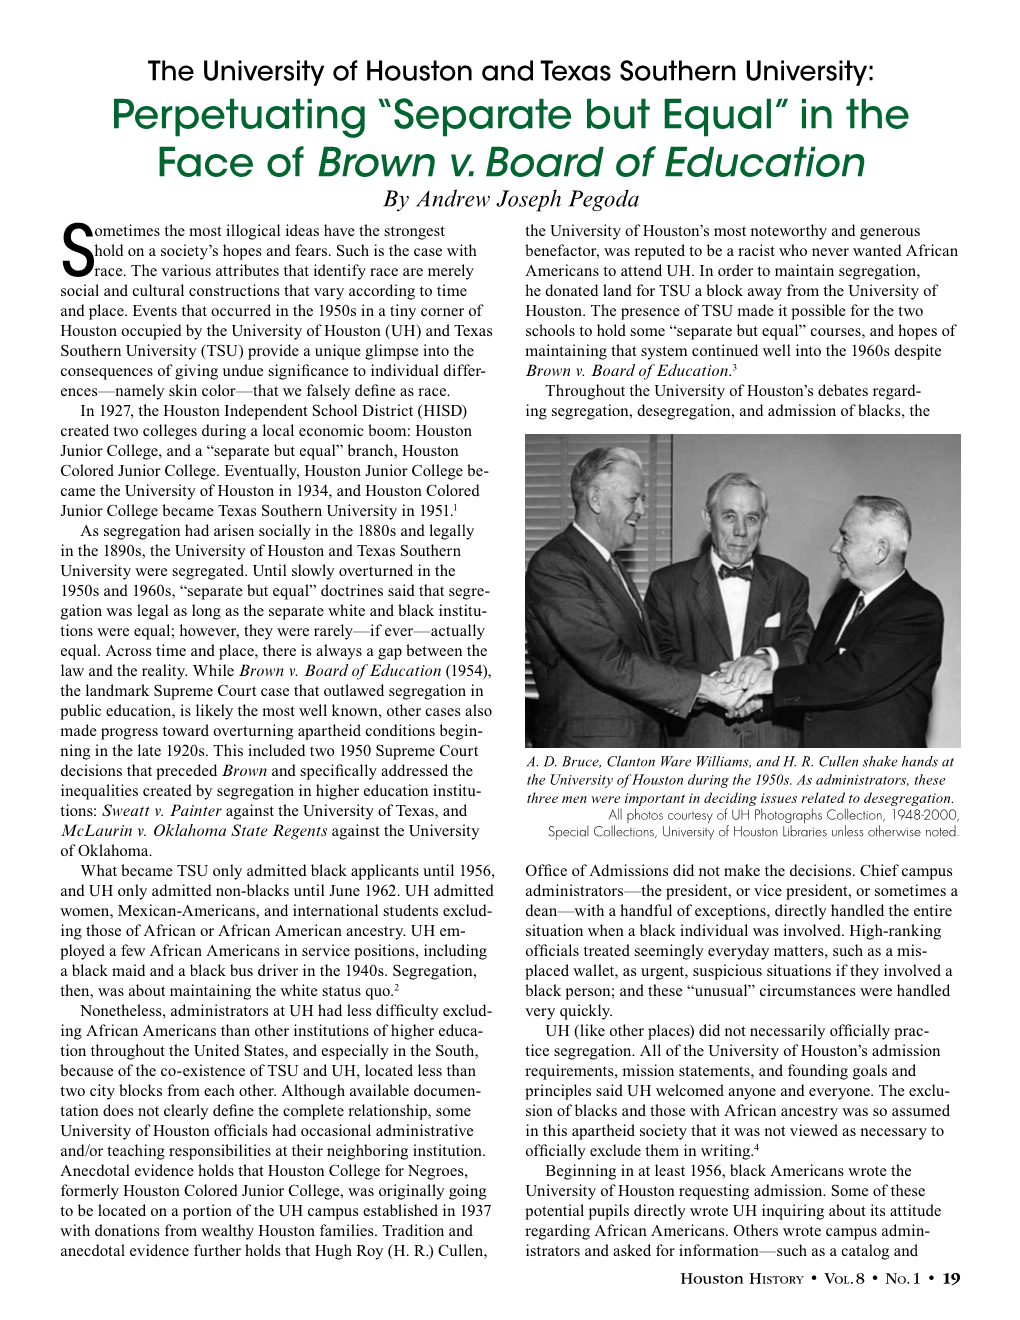 “Separate but Equal” in the Face of Brown V. Board of Education